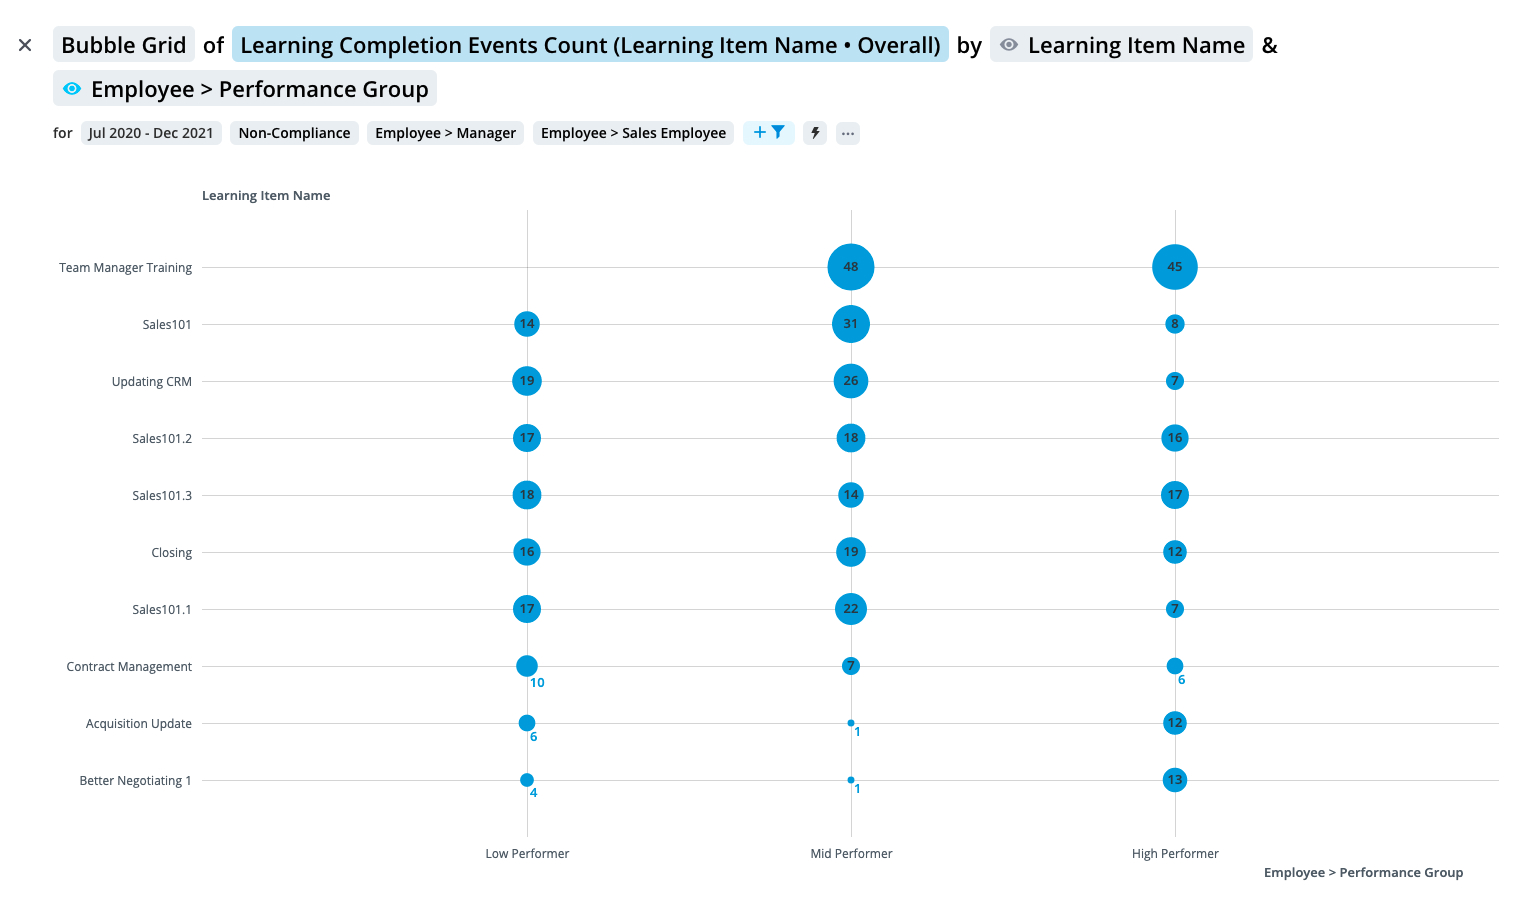 Data visualization showing learning completion events by performance group